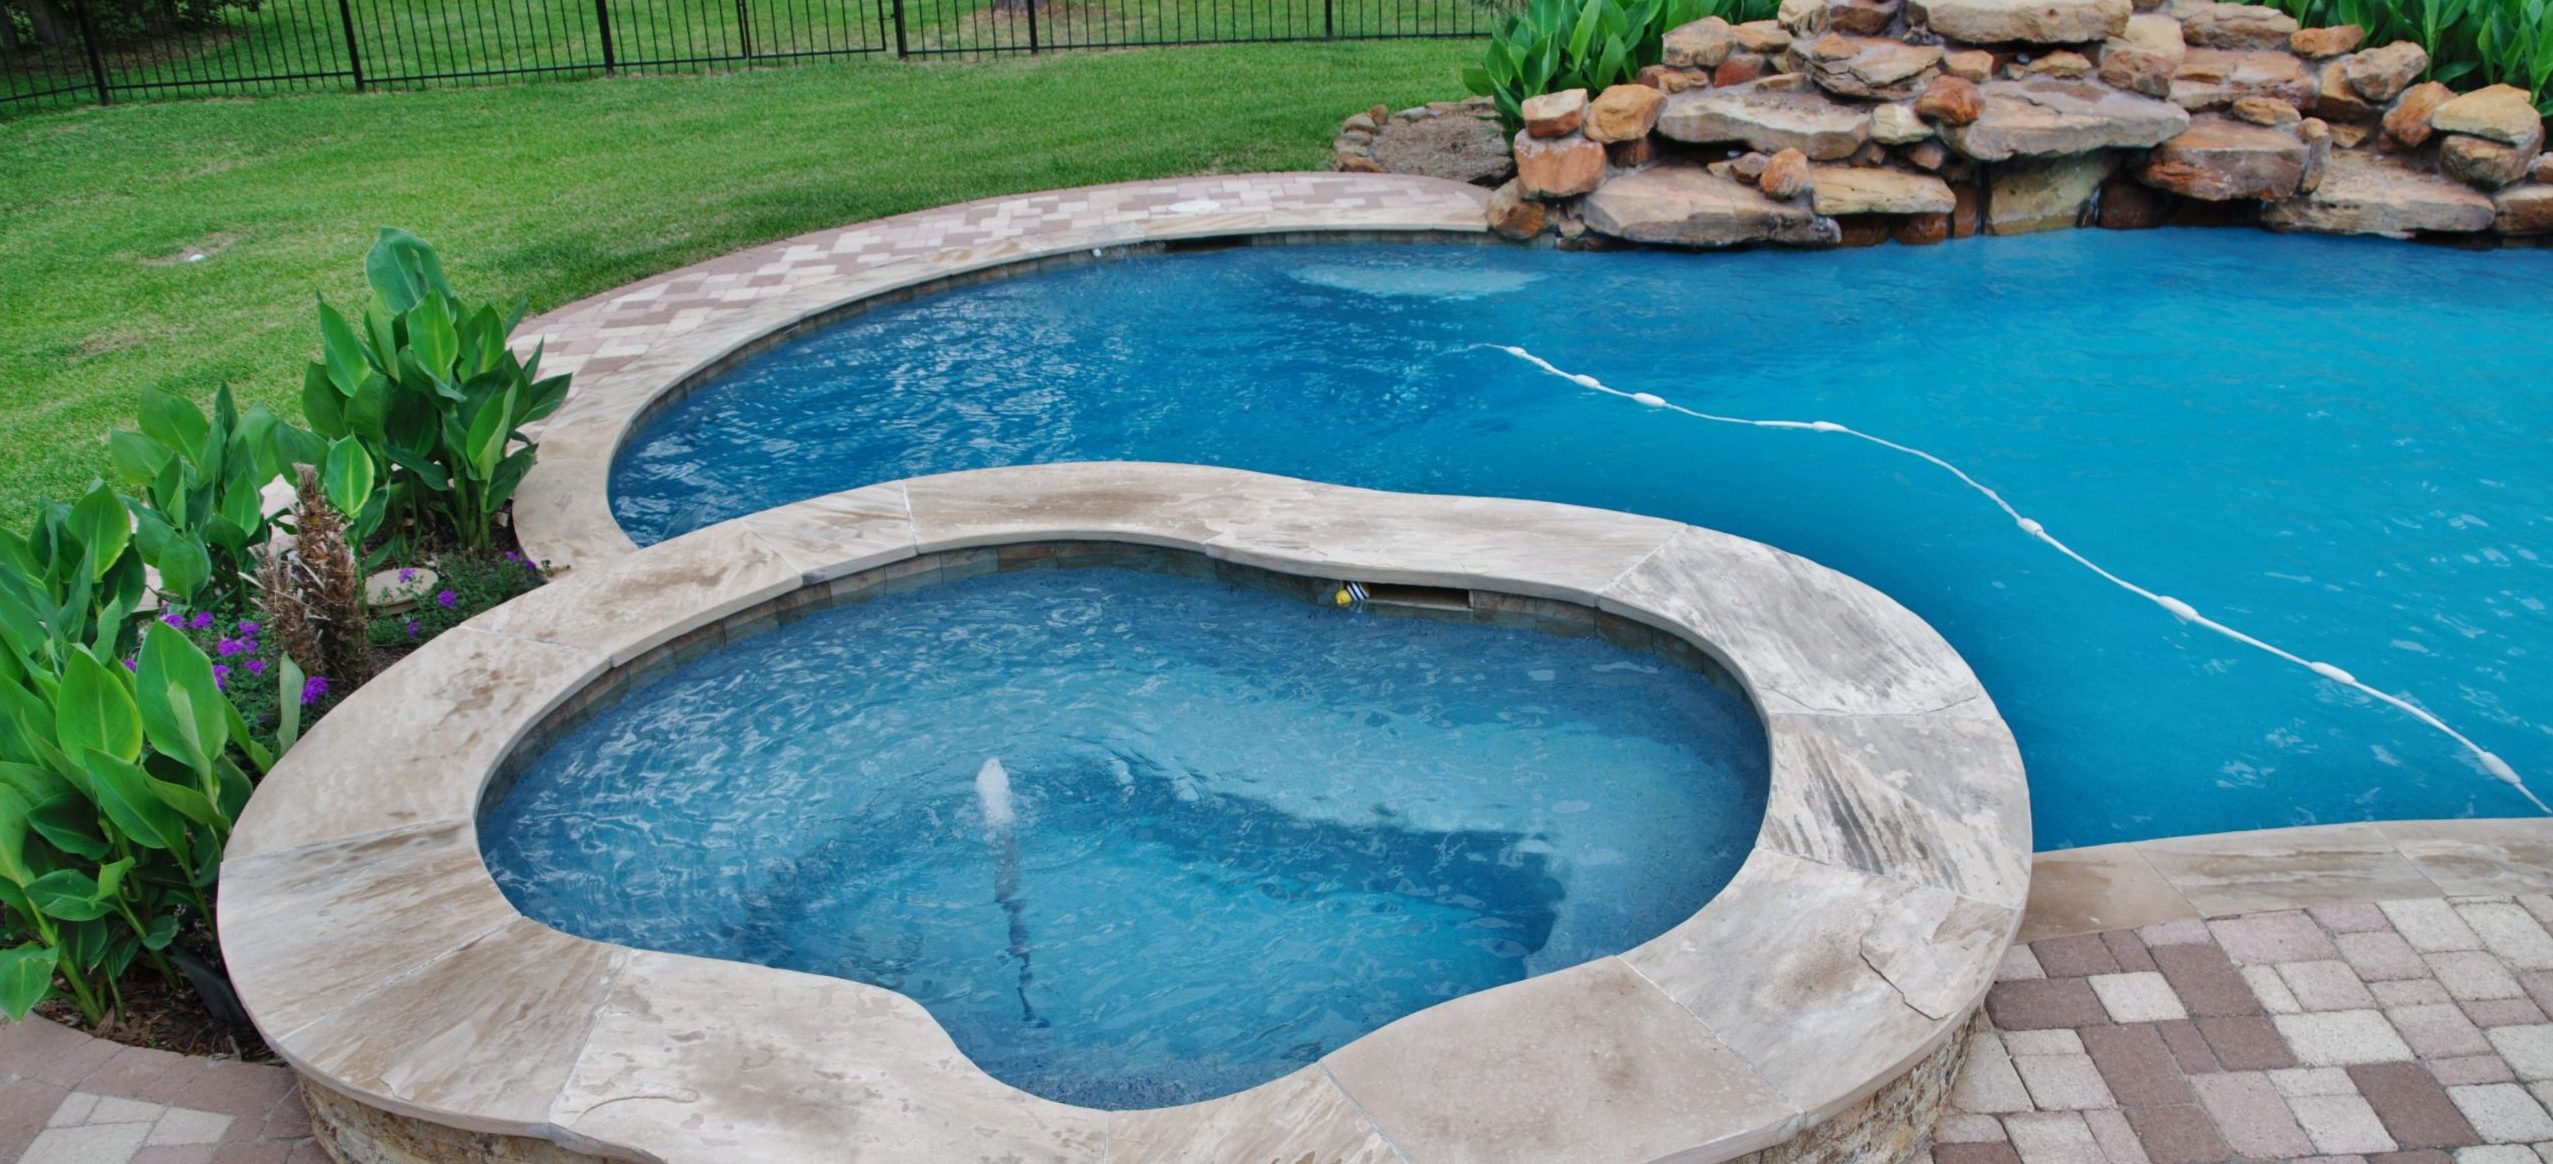 Why Fall is the Best Time to Schedule a Pool Renovation